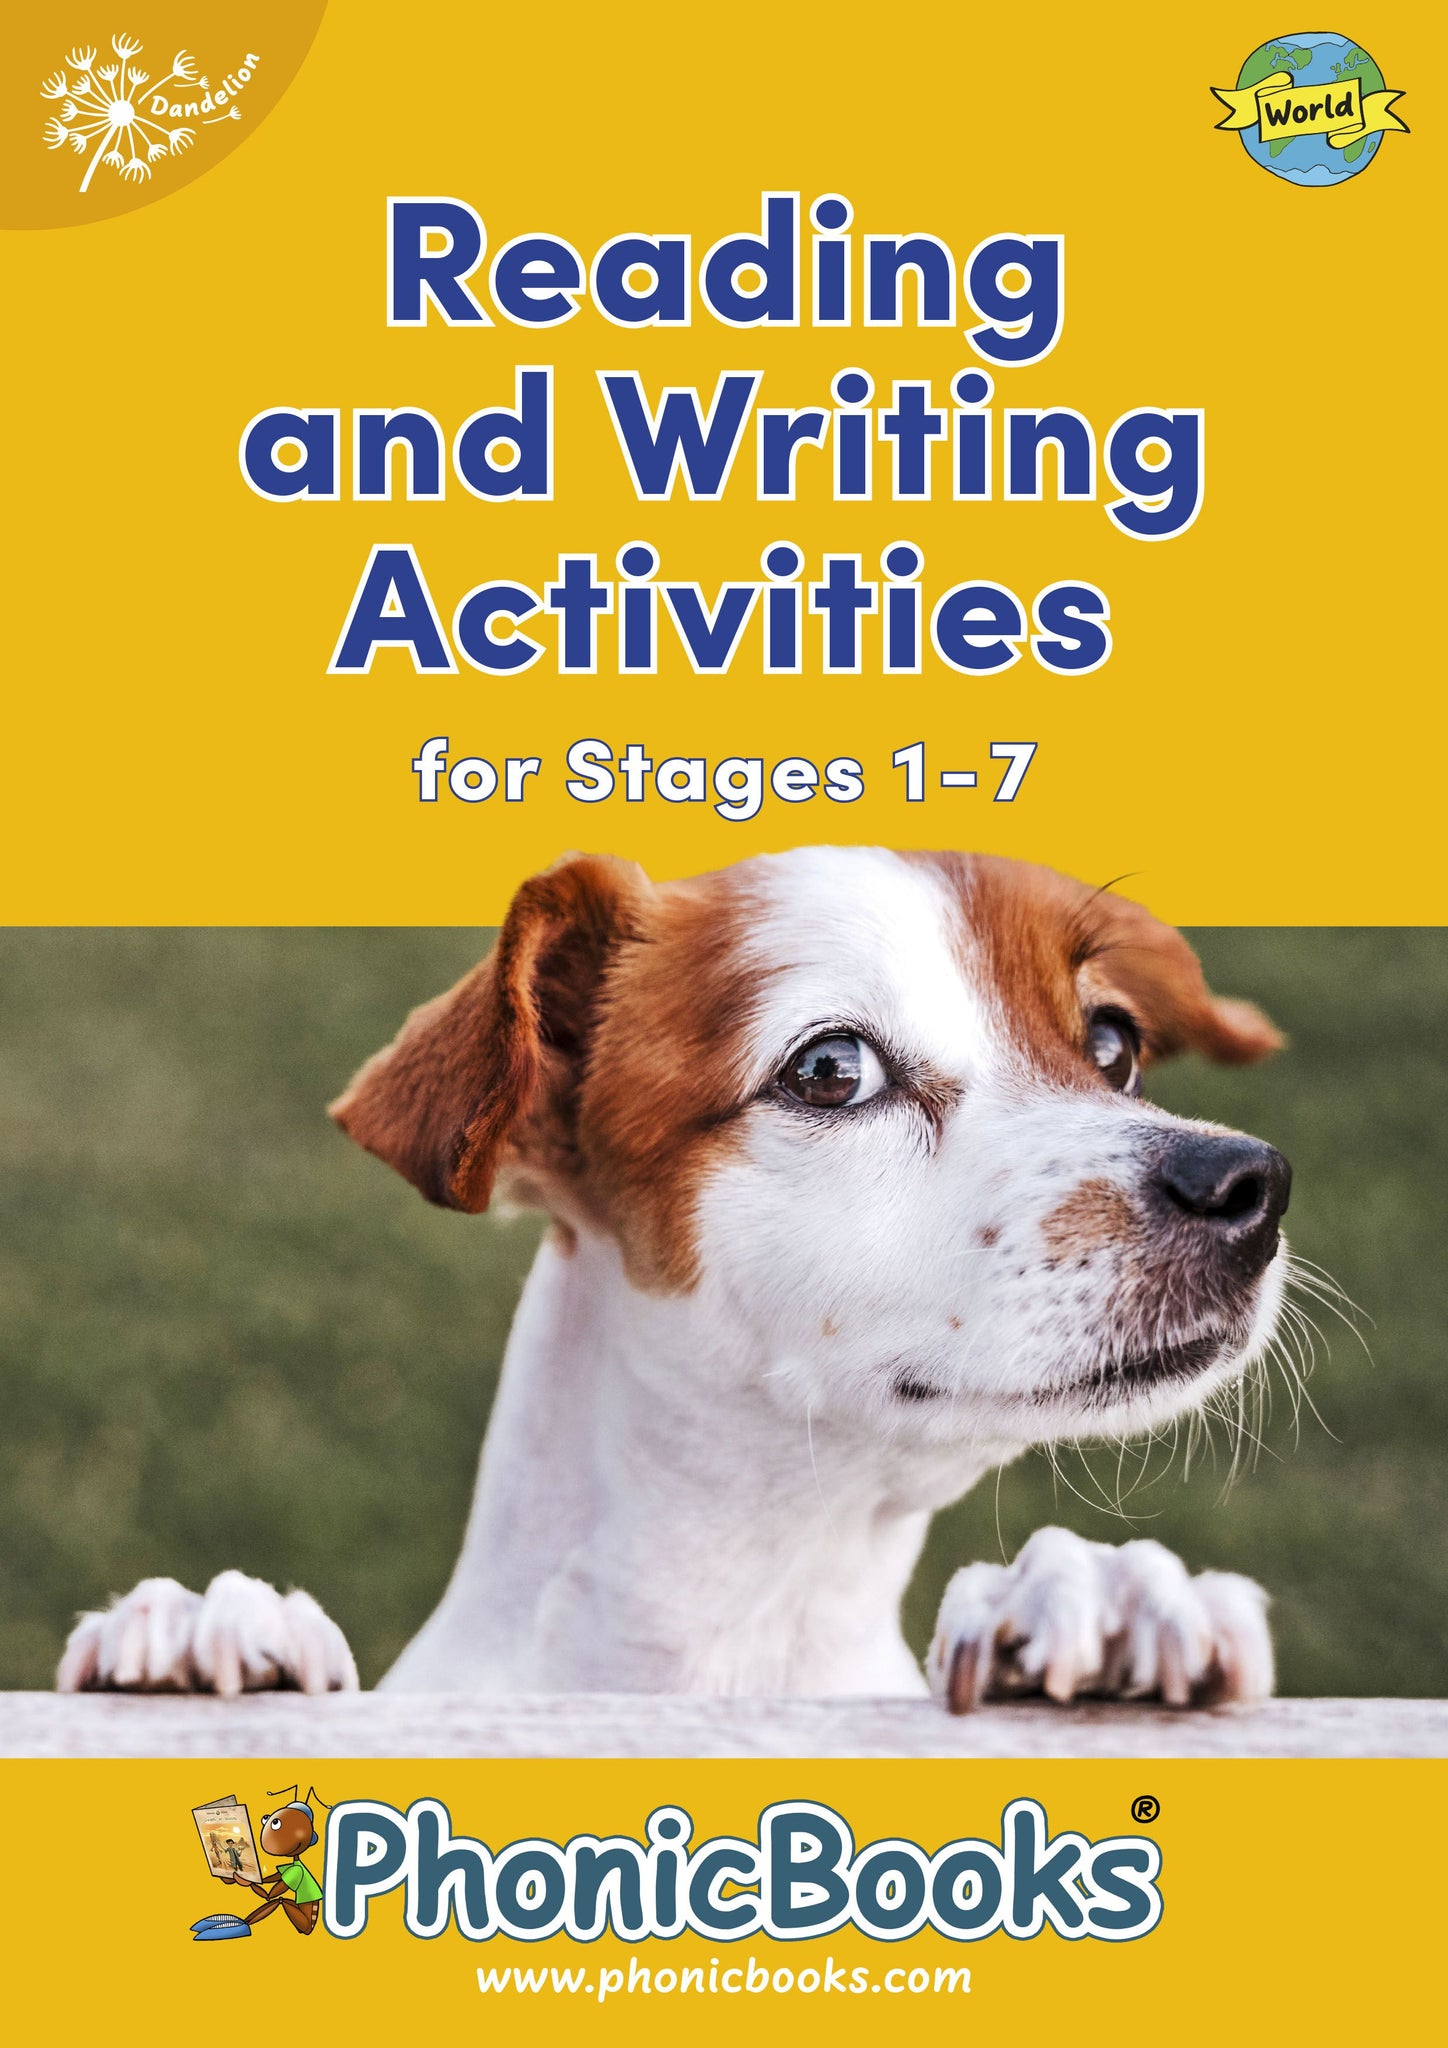 Dandelion World Reading and Writing Activities for Stages 1-7